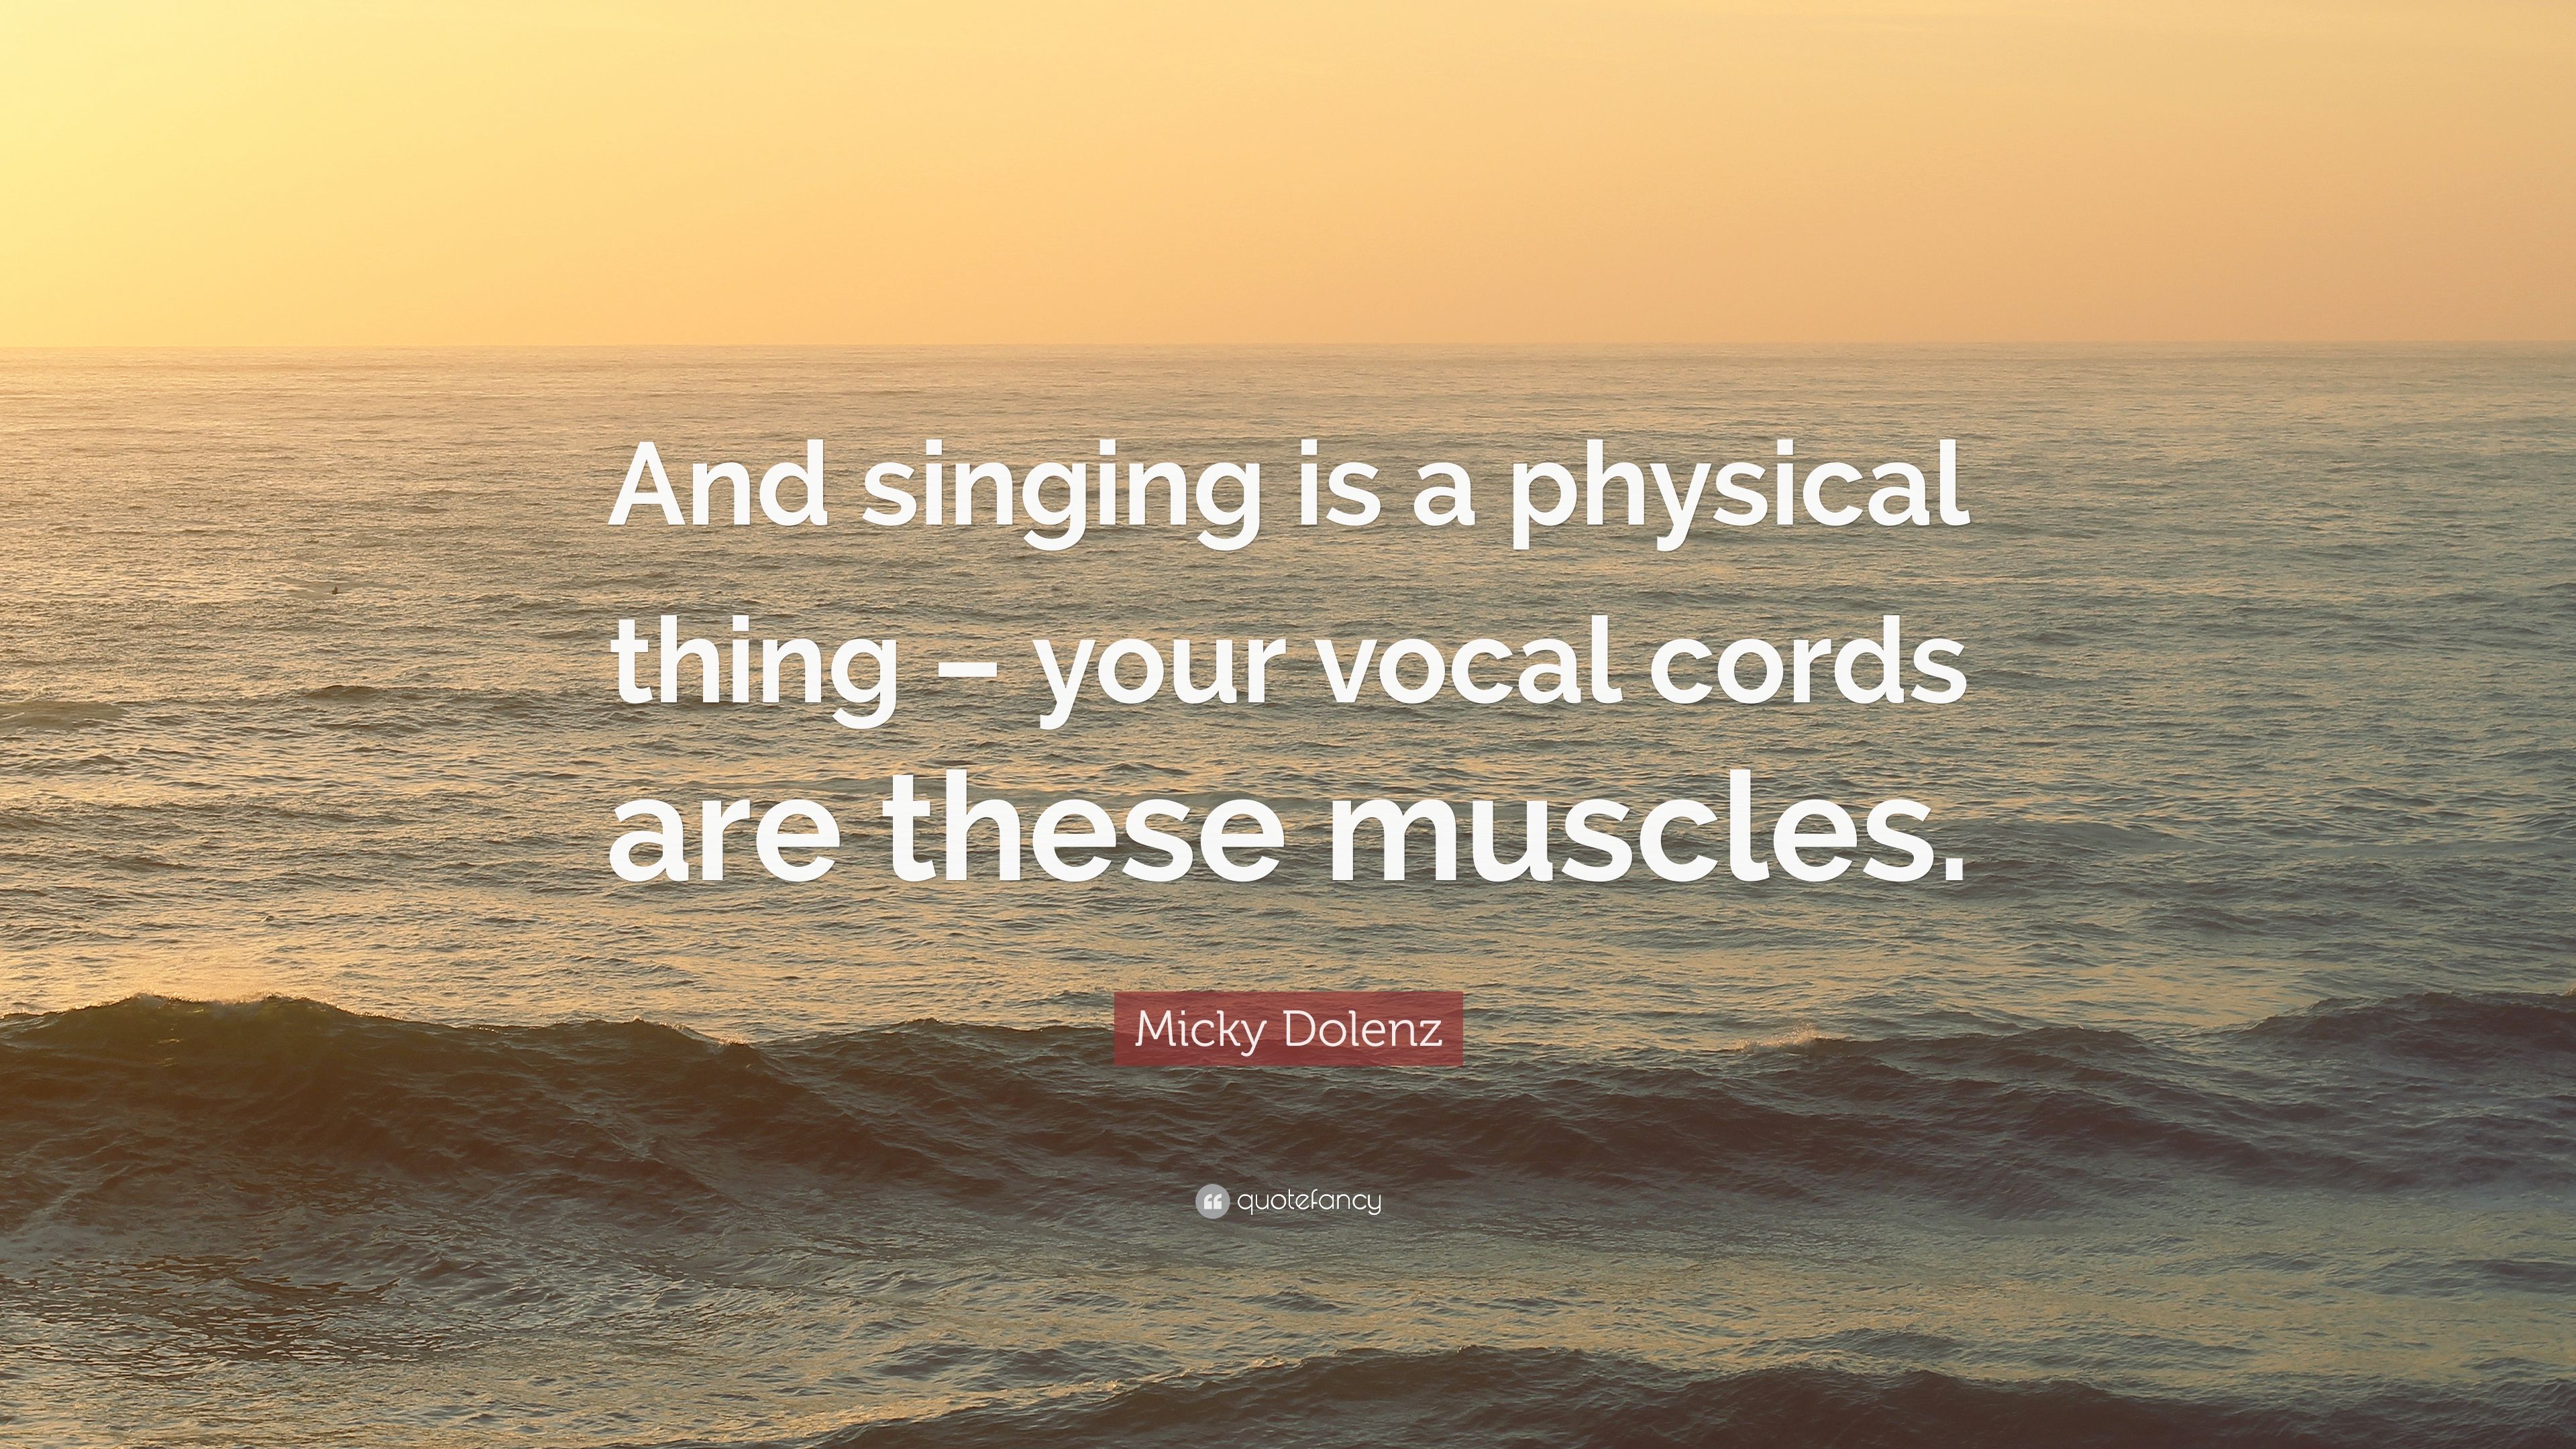 Micky Dolenz Quote: “And singing is a physical thing